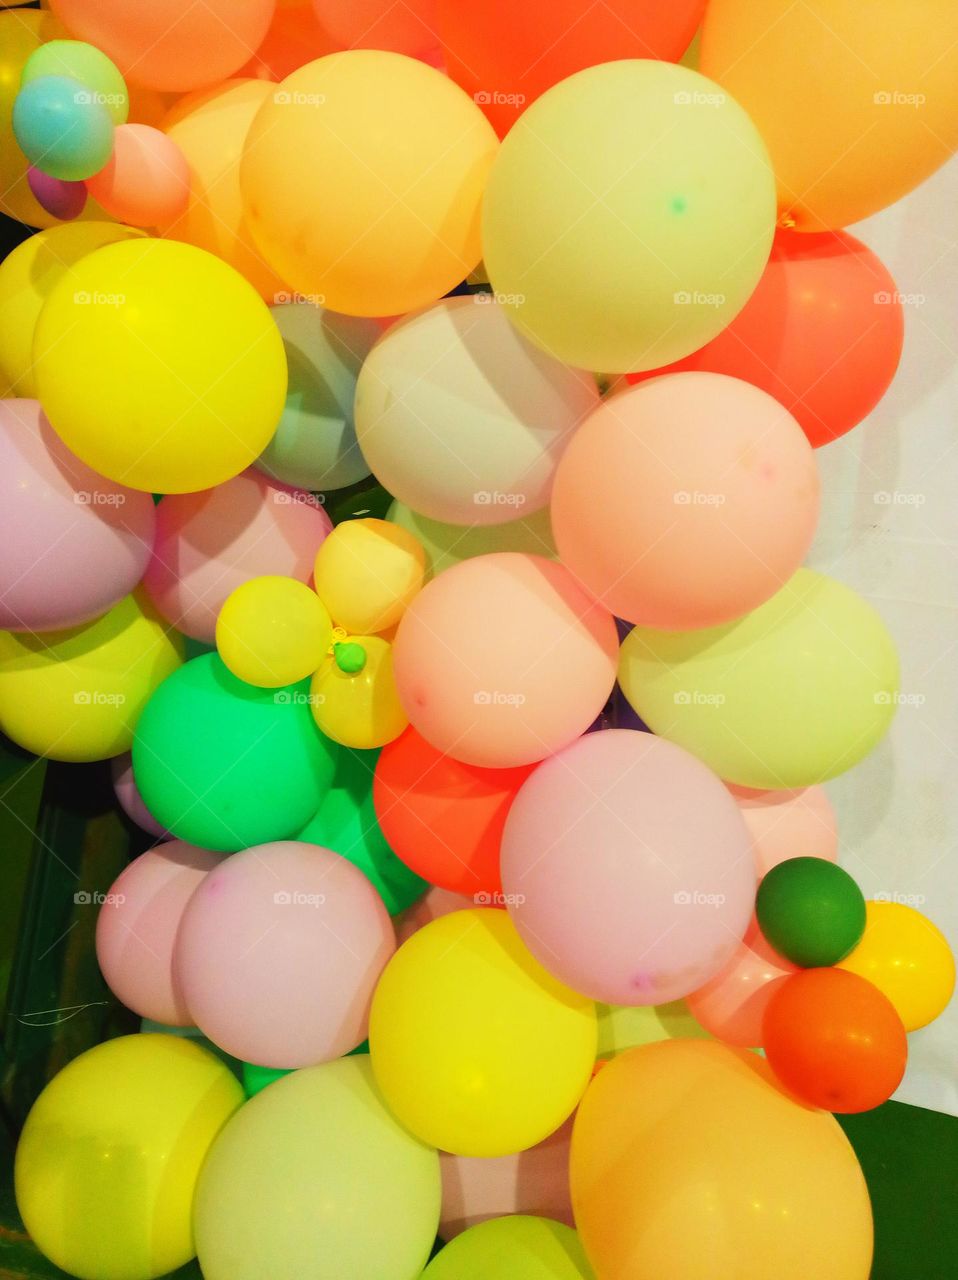 Bright and colorful balloons. Good for celebrations.